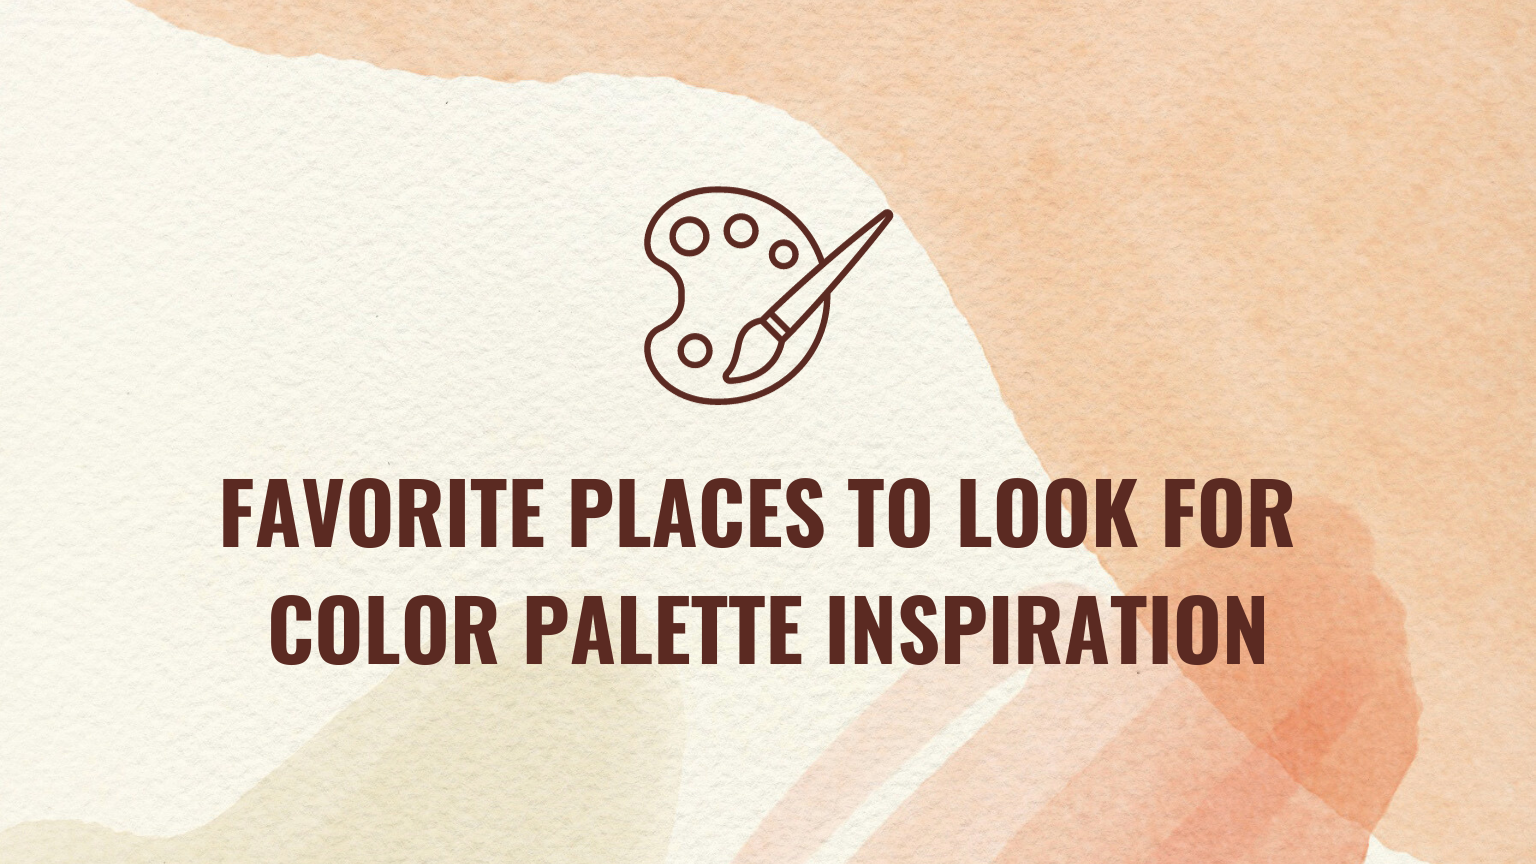 Color Palette Inspiration – my favorite places to look for interesting color palettes